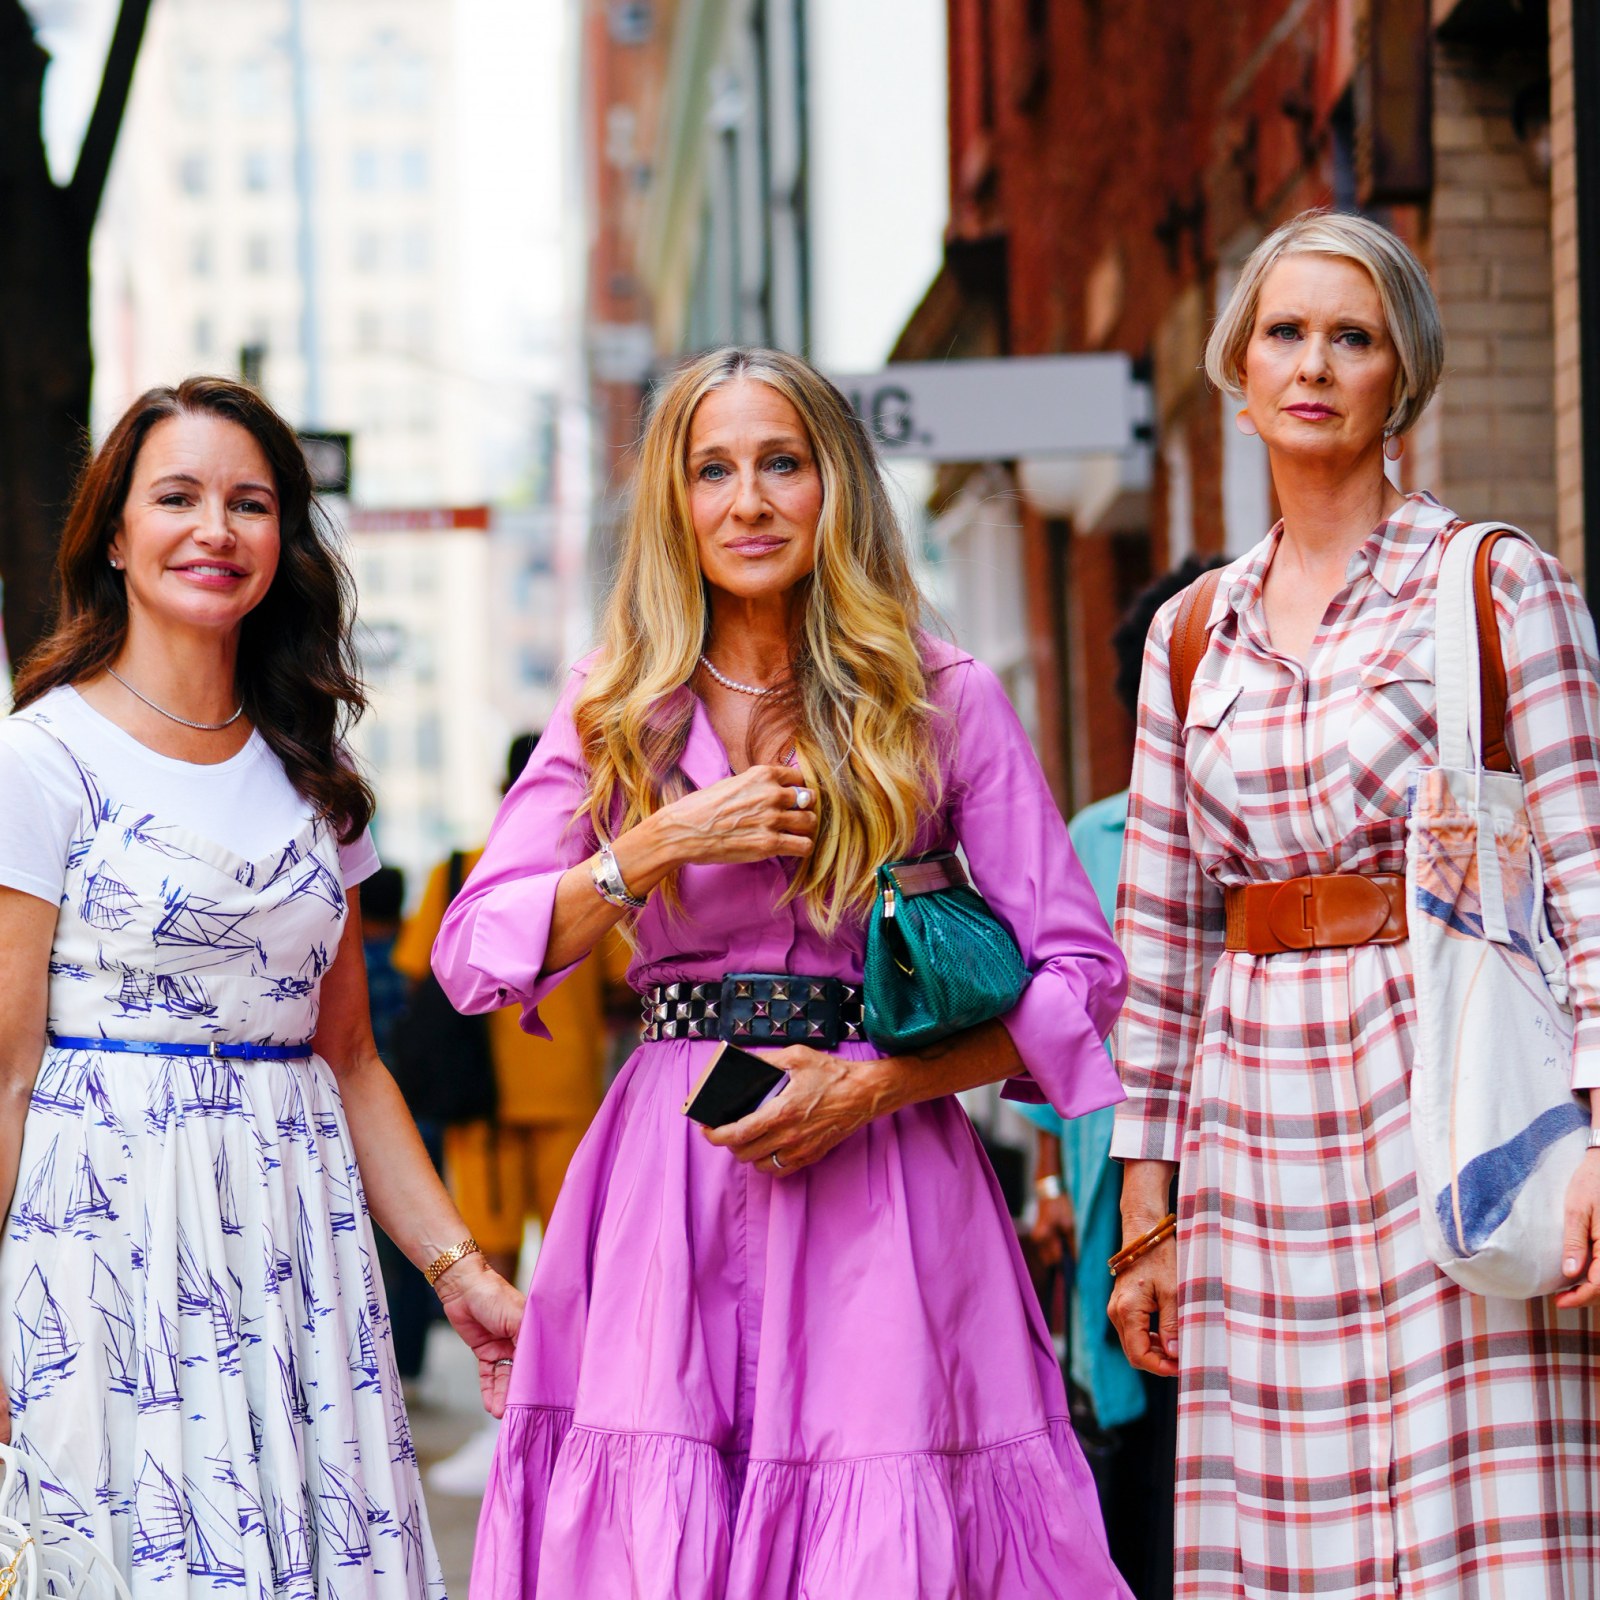 New Yorker Shares Glimpse of 'Sex and the City' Reboot—Including Carrie's  Outfit